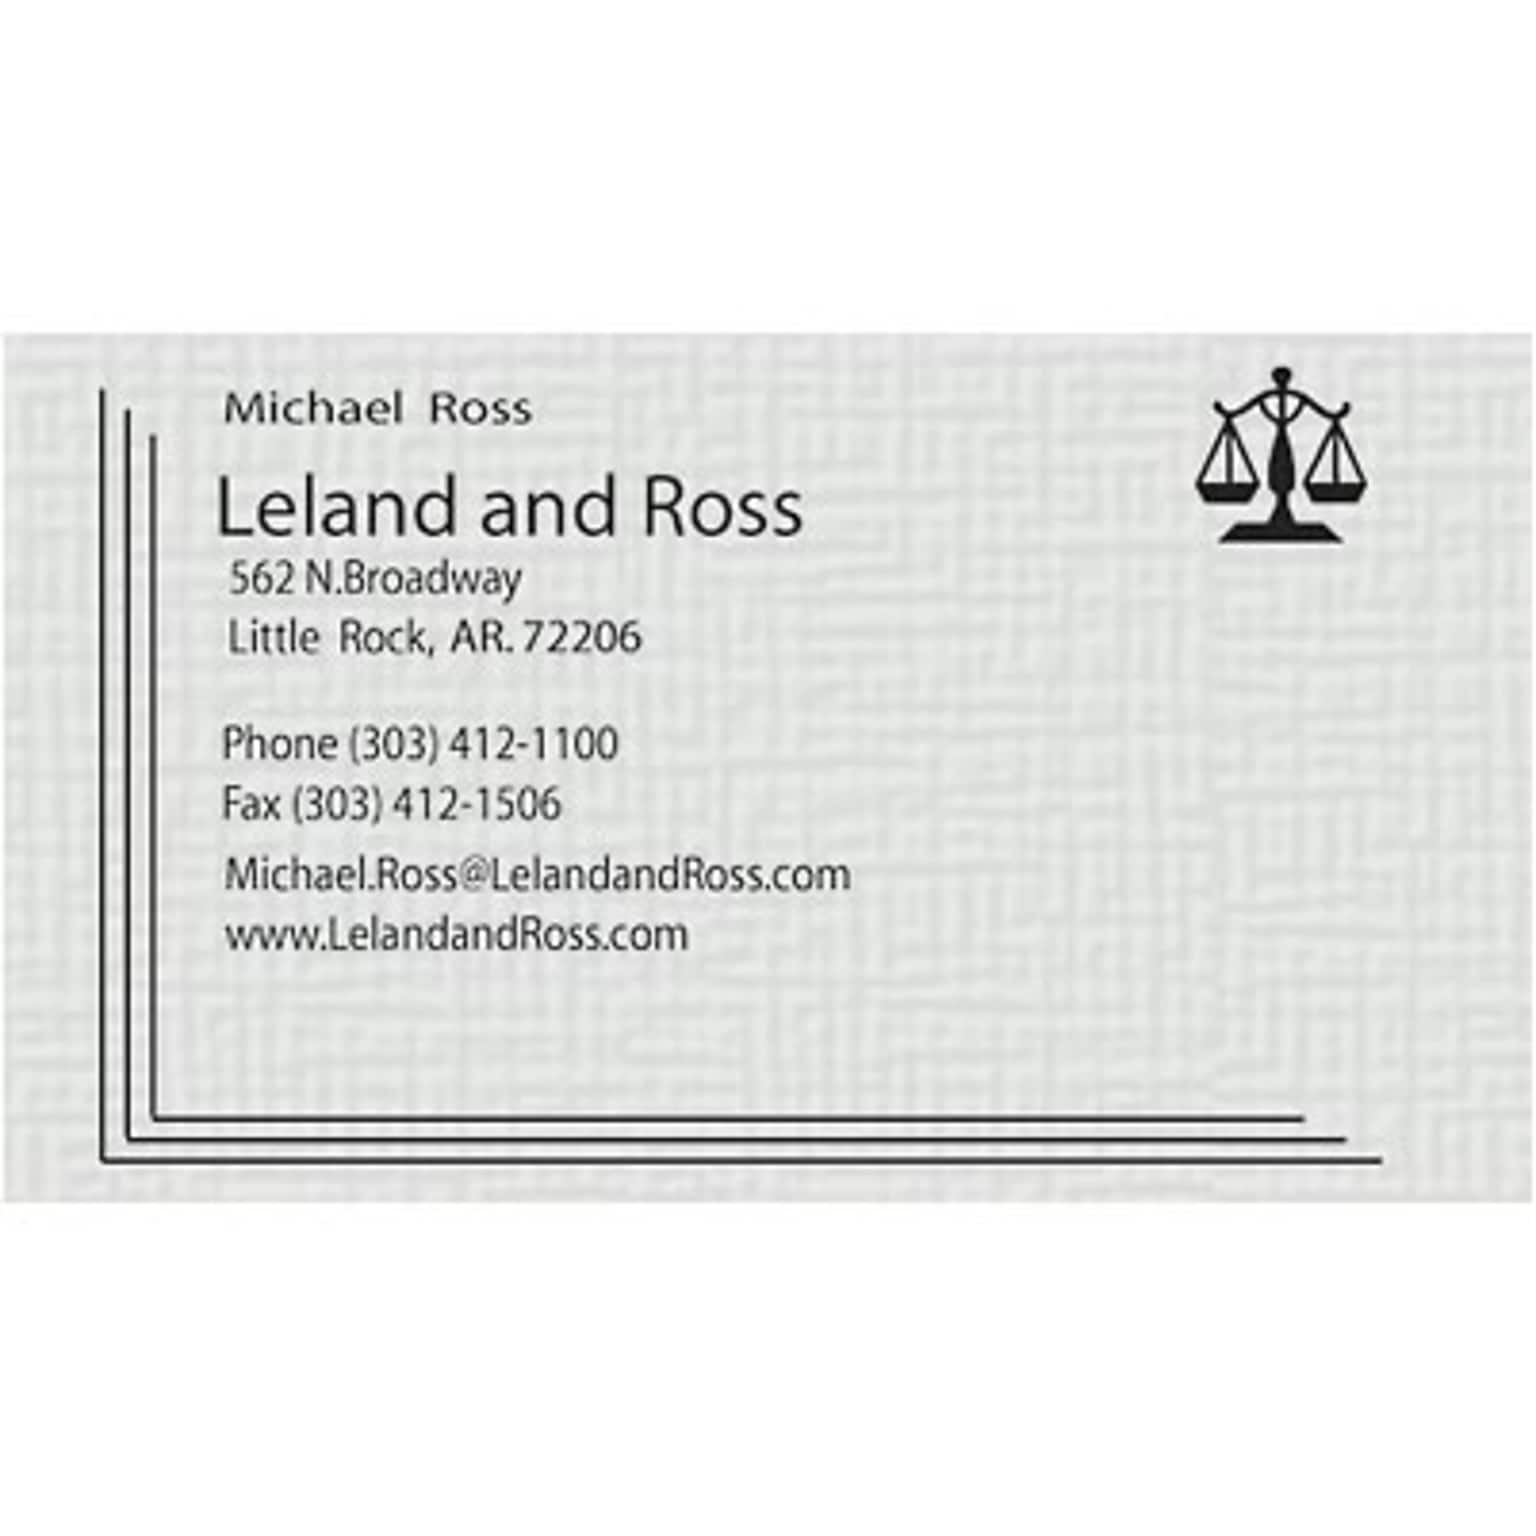 Custom 1-2 Color Business Cards, CLASSIC® Laid Antique Gray 80#, Raised Print, 1 Standard Ink, 2-Sided, 250/PK